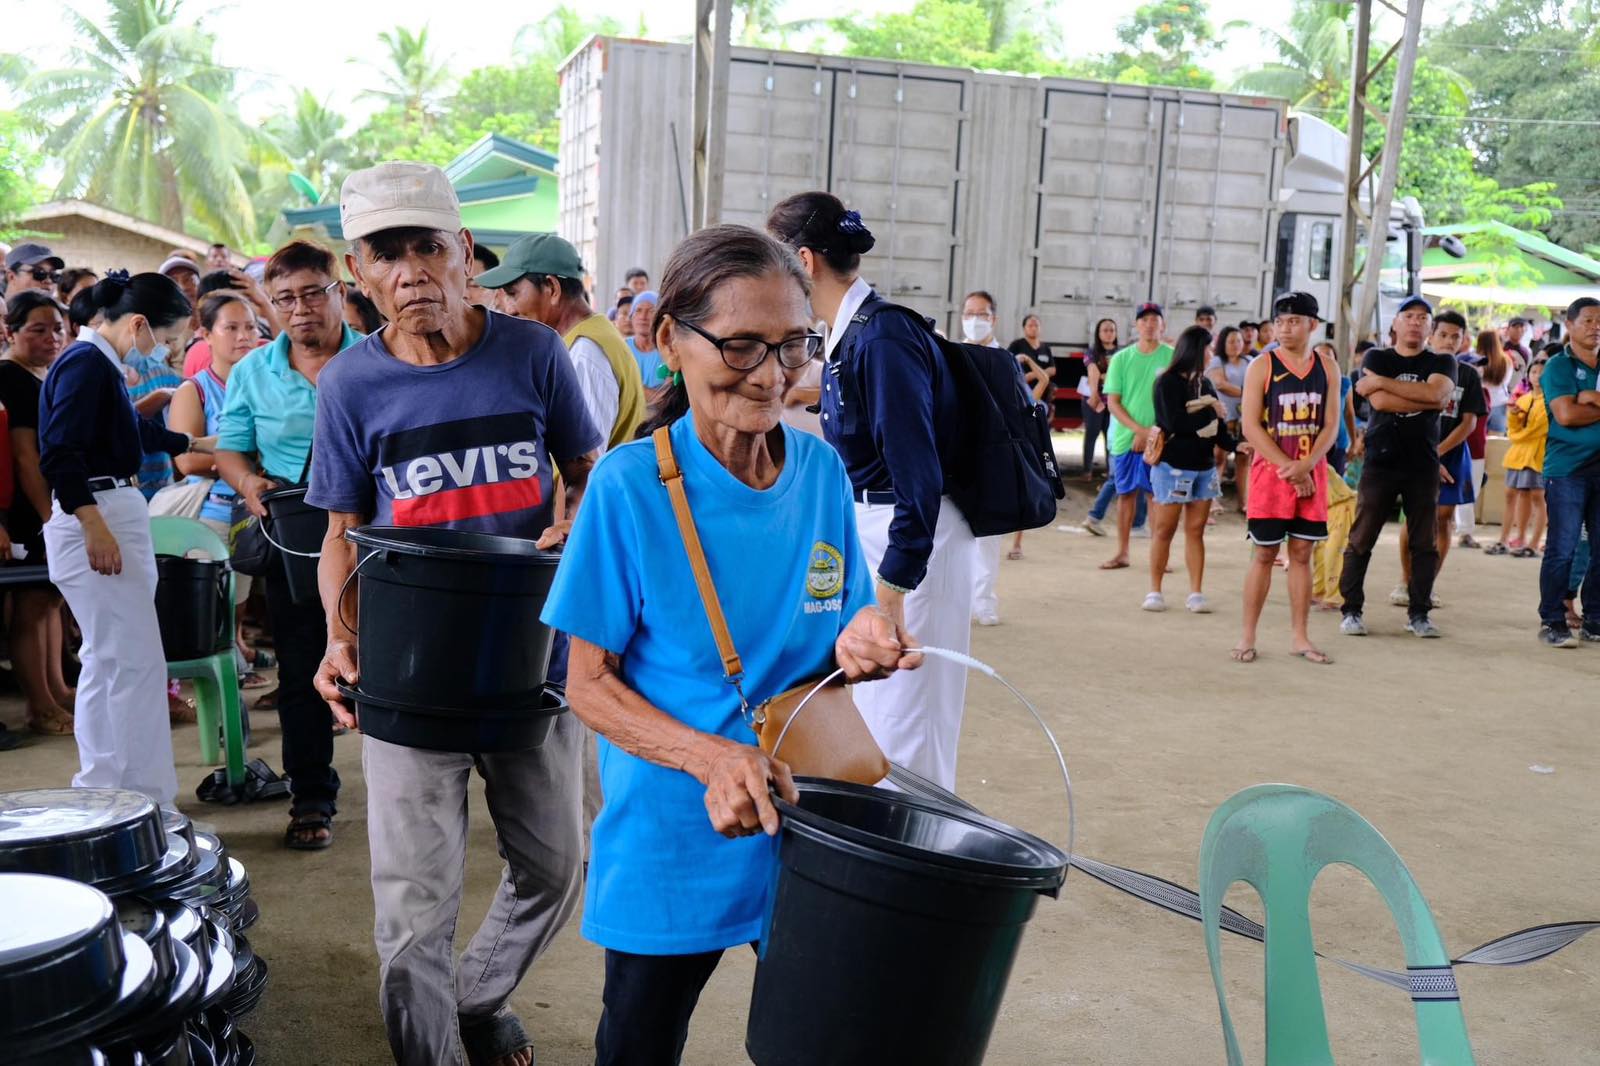 The beneficiary received a pail as a sign of her readiness to accept the goods.【Photo by Tzu Chi Davao】